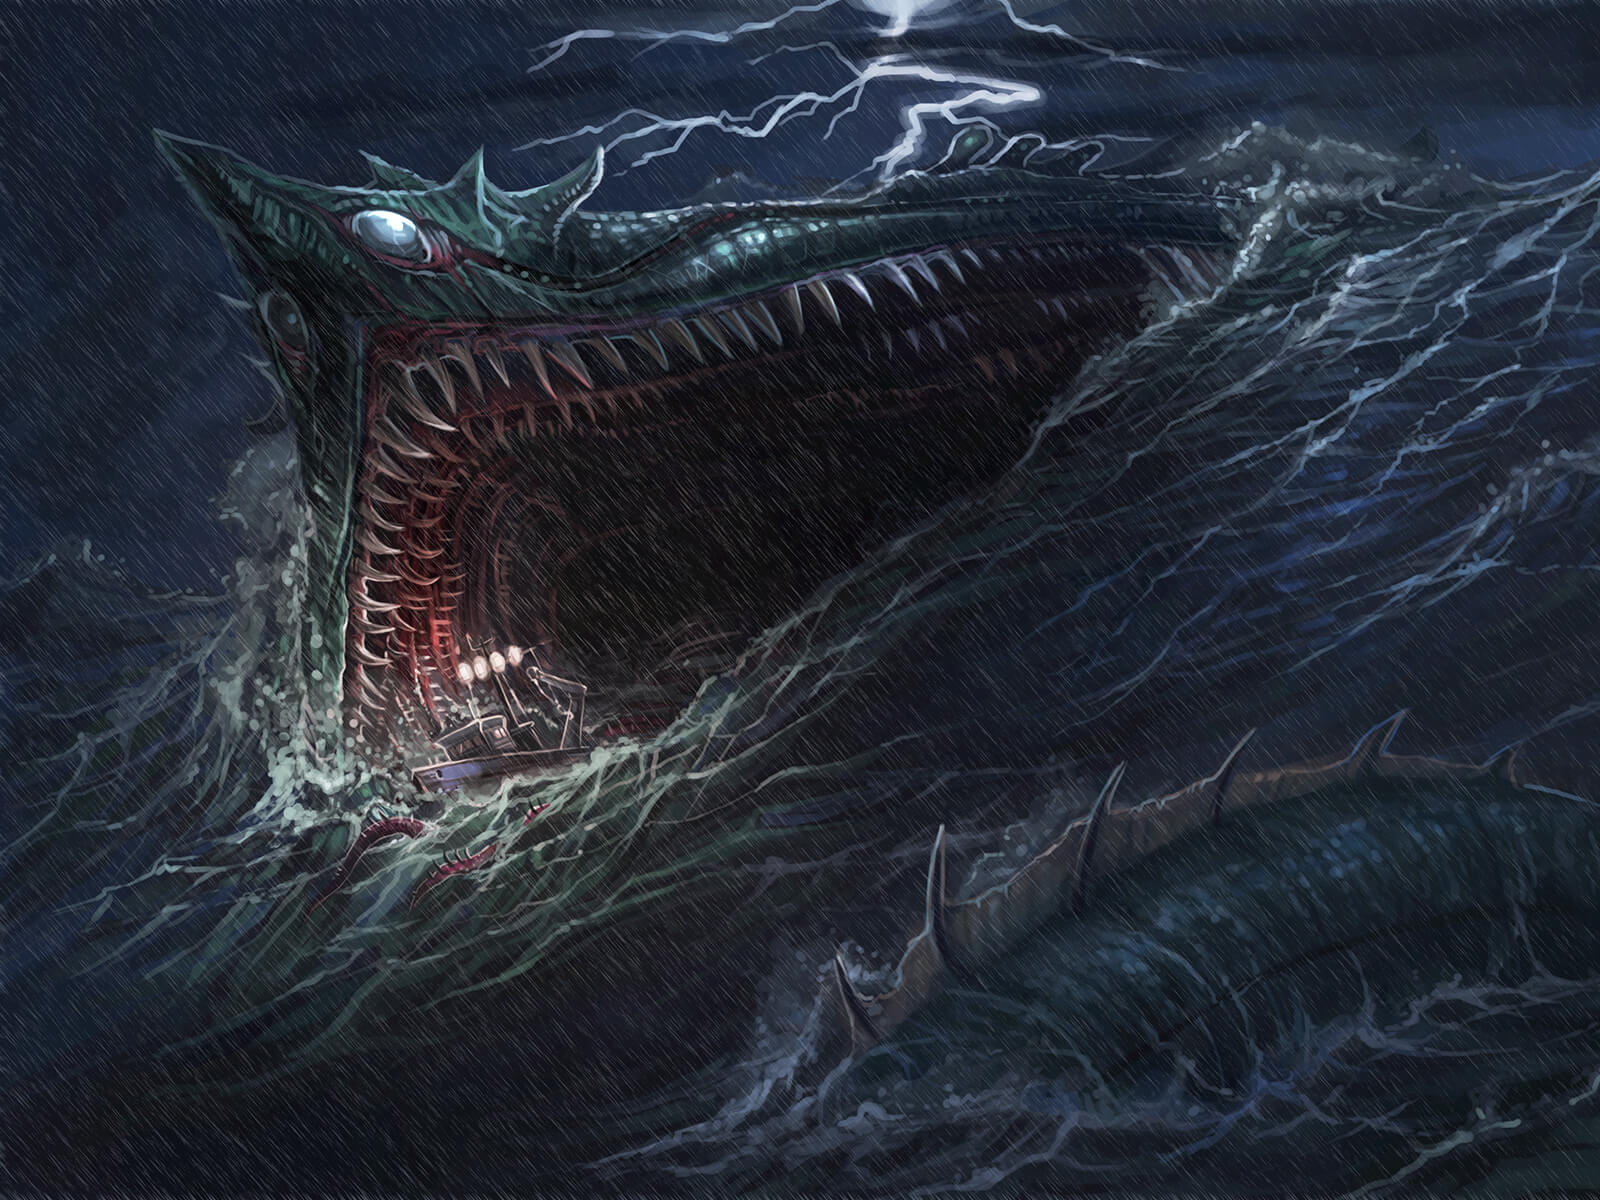 The teeth-filled maw of a massive sea serpent opens over tumultuous seas as a fishing boat is sucked down its dark recesses.